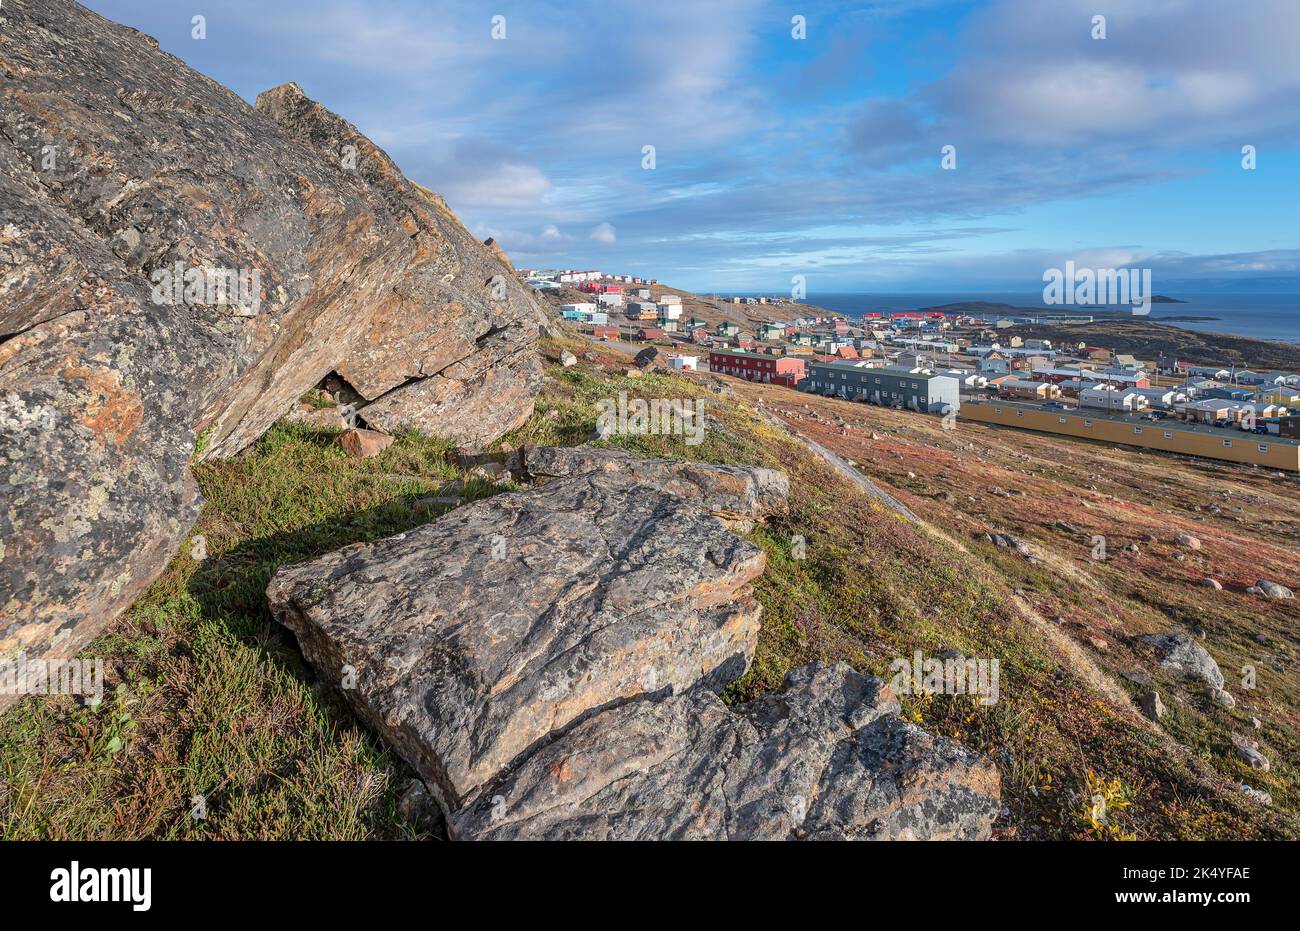 Overview of the city of Iqaluit with large boulders on the hillside above Stock Photo